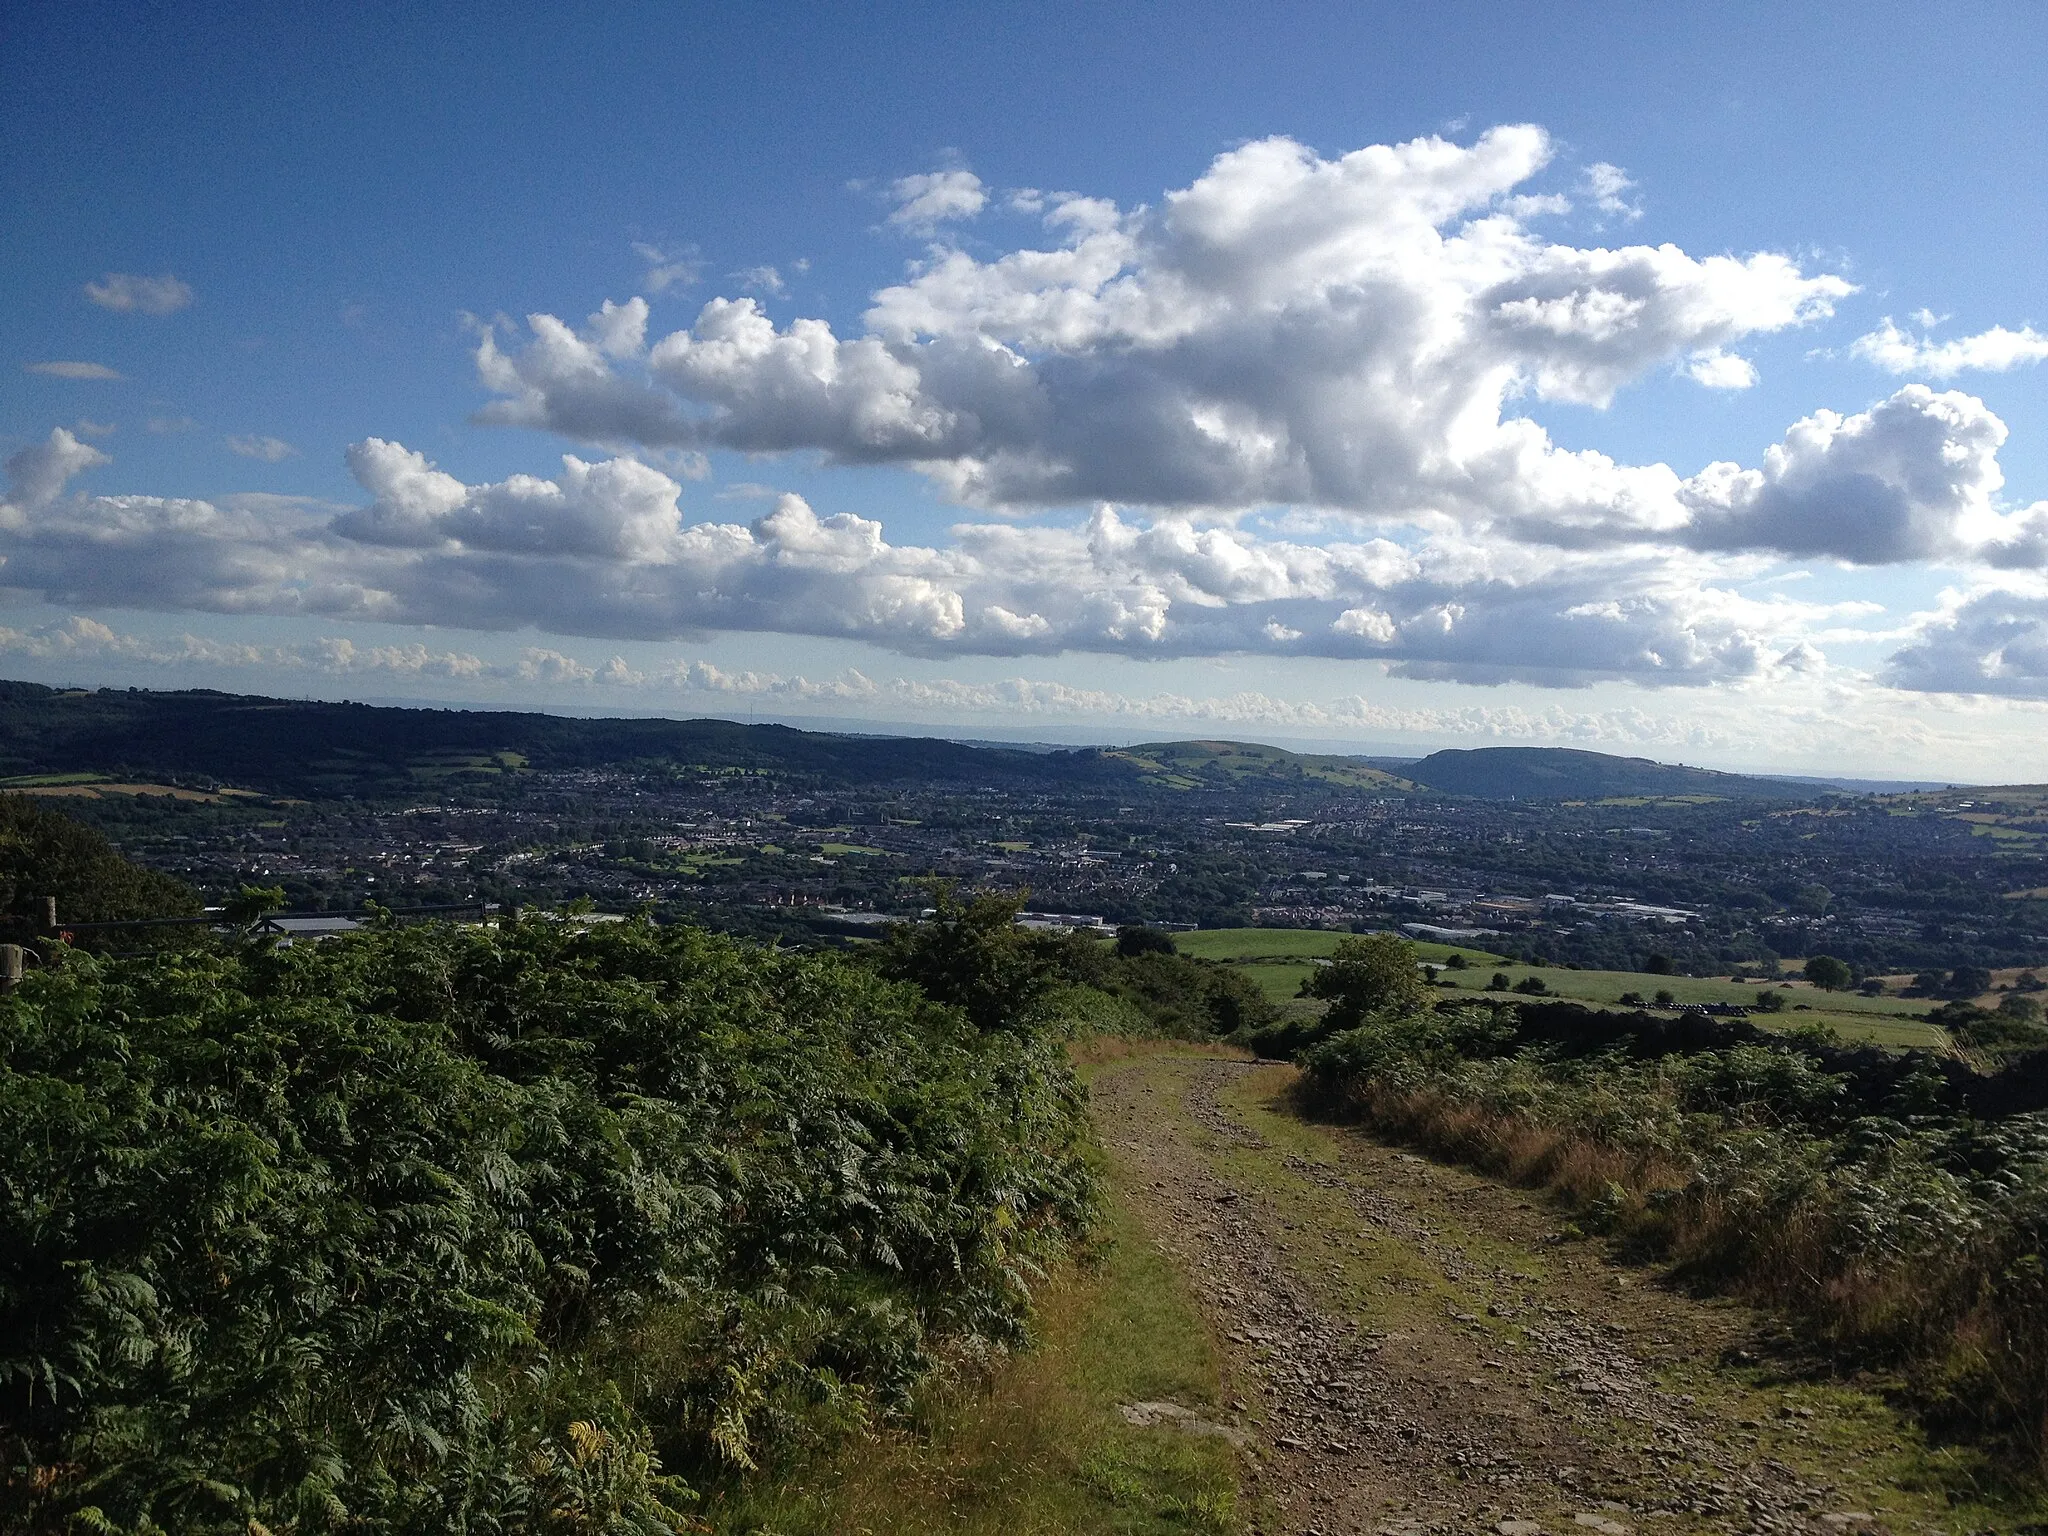 Photo showing: A view of Bedwas and Caerphilly from National Cycle Route 47 also known as the Celtic Trail cycle route. The hill is accessed from the Ynys Hywel Activity Centre between Cwmfelinfach and Ynysddu.